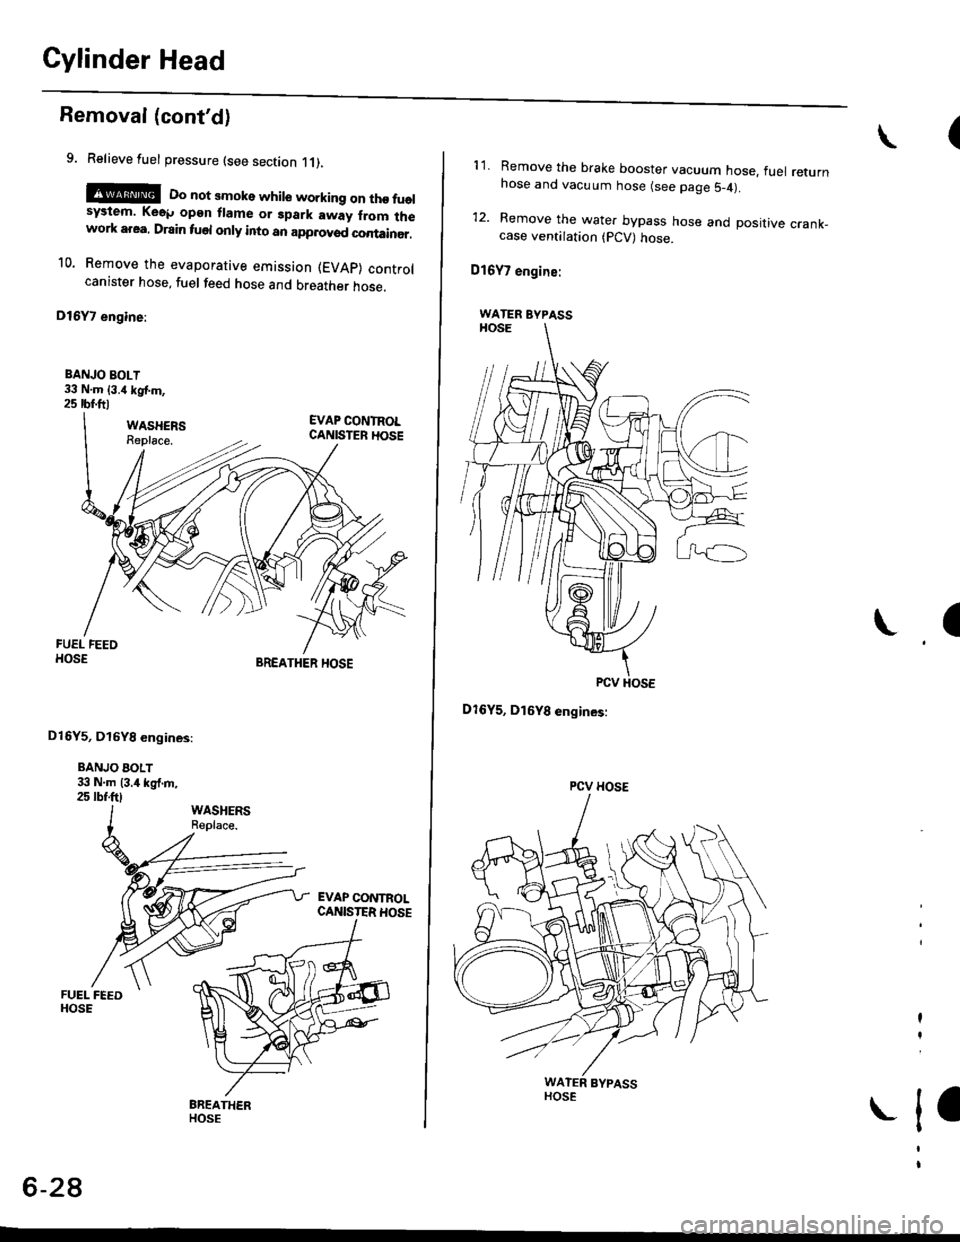 HONDA CIVIC 1998 6.G Workshop Manual Cylinder Head
Removal (contd)
9. Relieve fuel pressure (see section 11),
E@E Do not smoke while working on tho fuelsystem. Ke6p opgn flame or gpark away from lhework area, Drain fuel only into an app